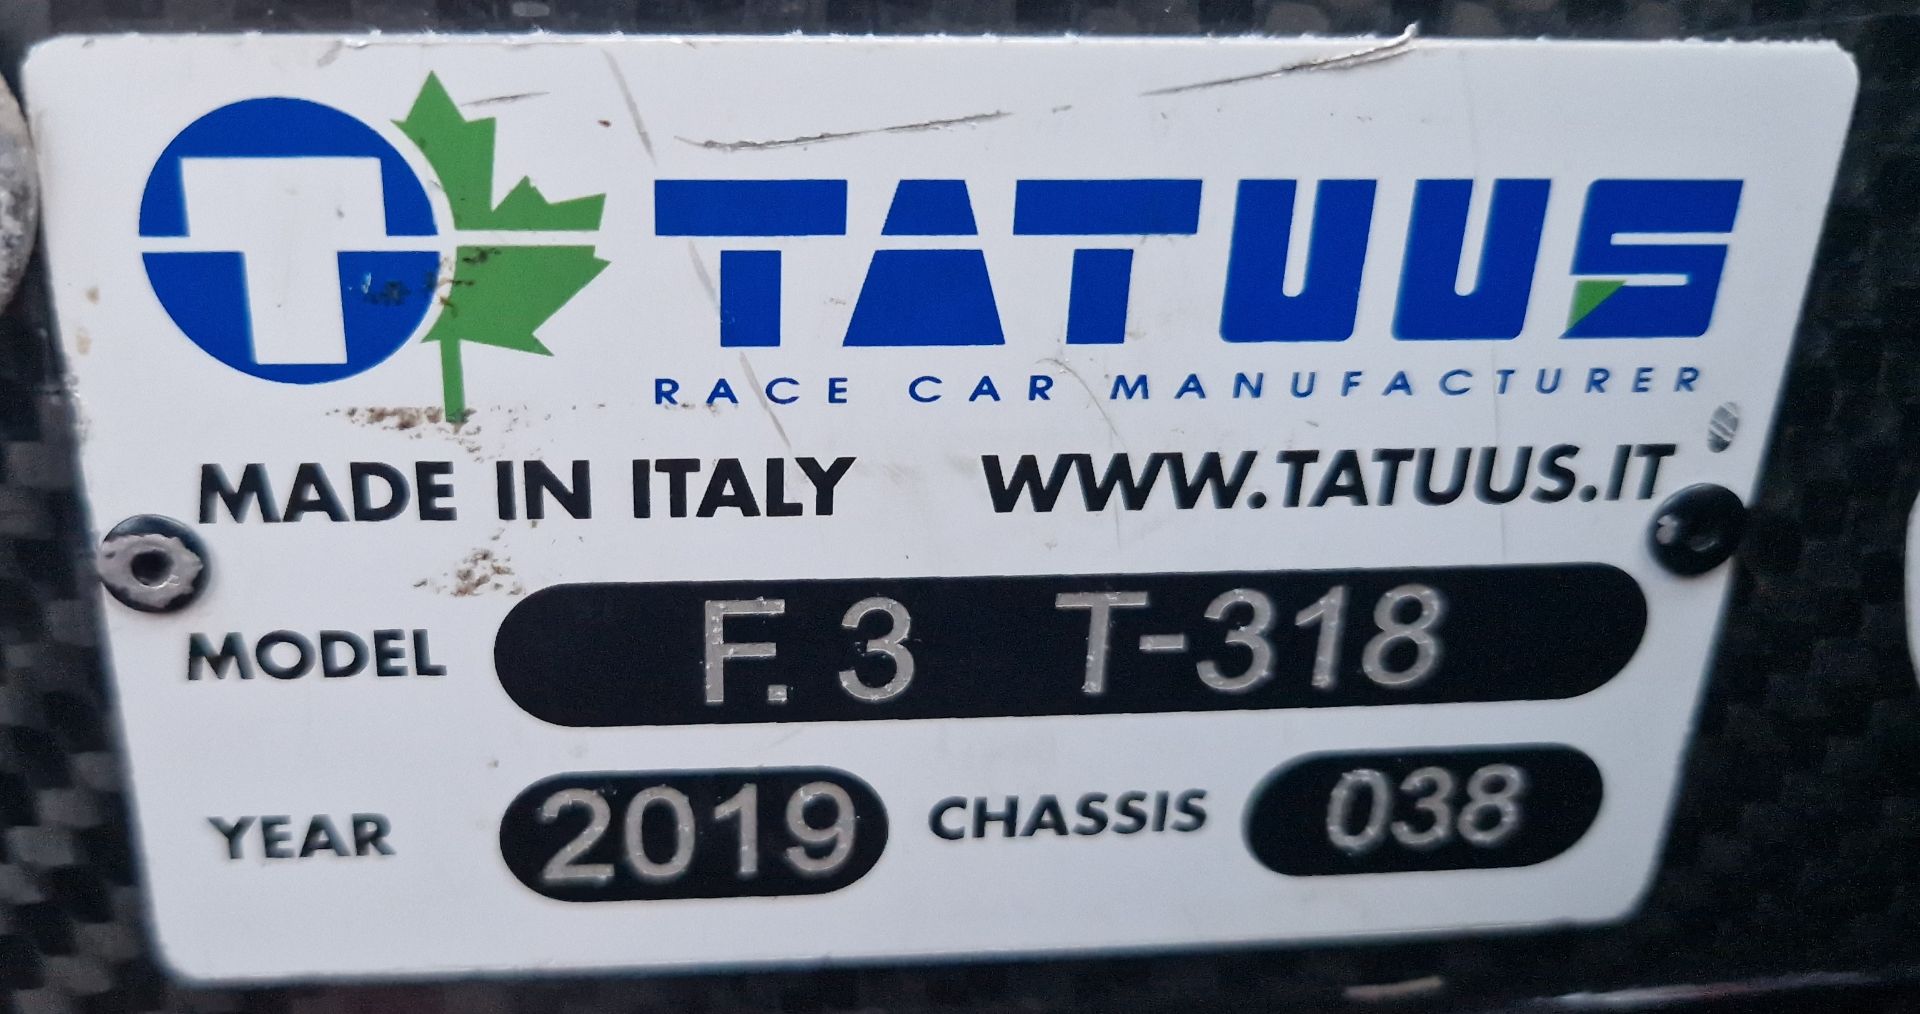 One TATUUS F3 T-318 Alfa Romeo Race Car Chassis No. 038 (2019) Finished in SCUDERIA Livery as Driven - Image 6 of 10